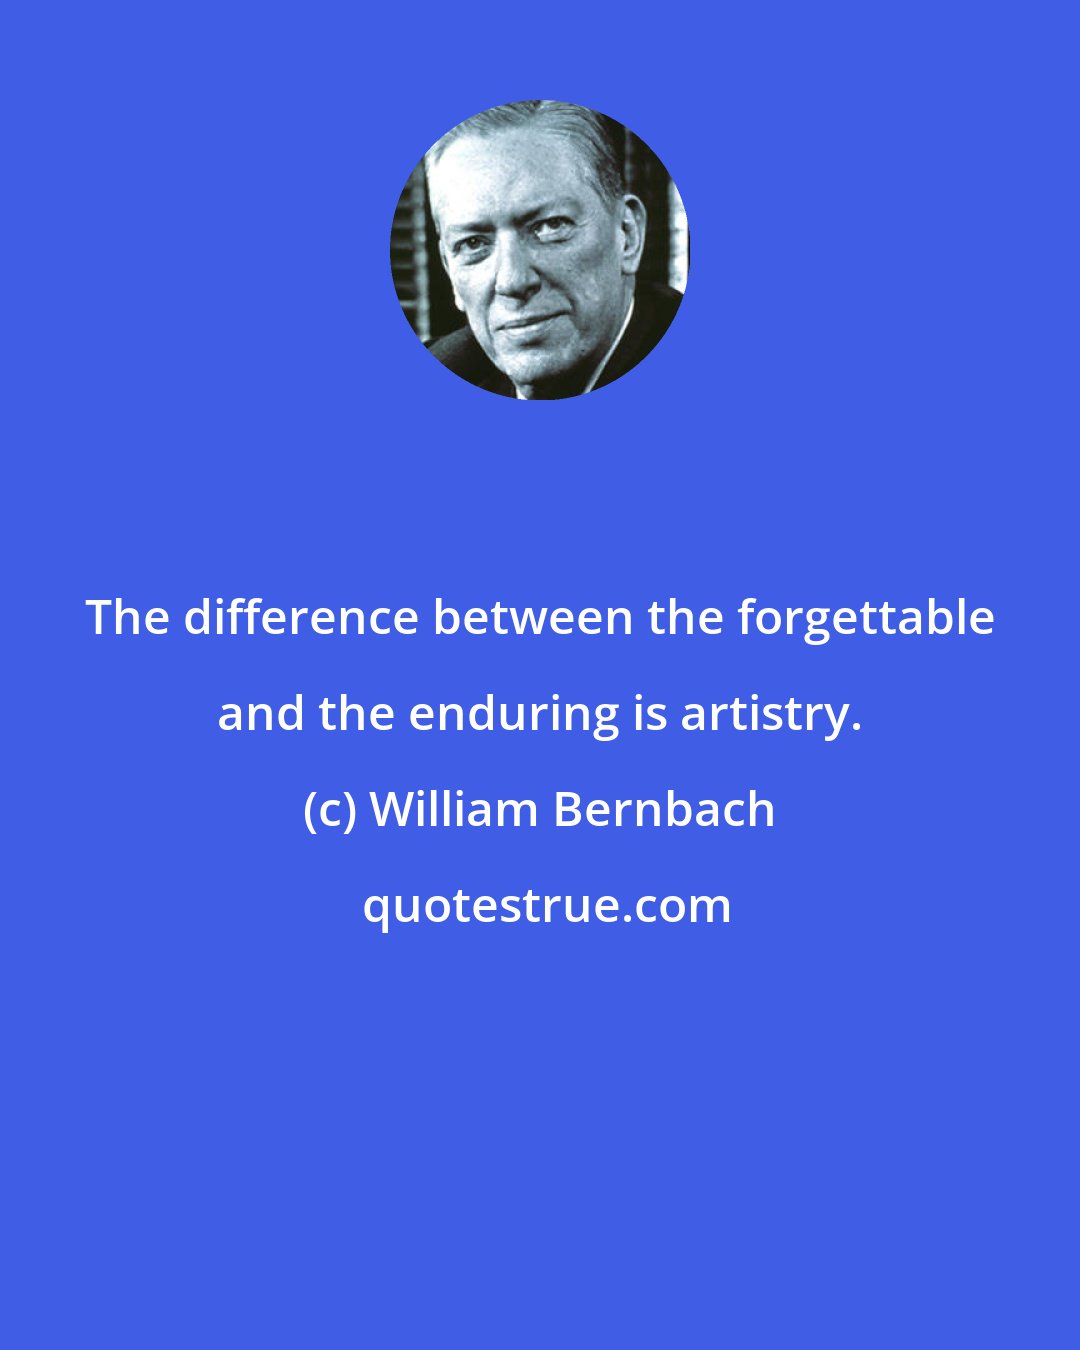 William Bernbach: The difference between the forgettable and the enduring is artistry.